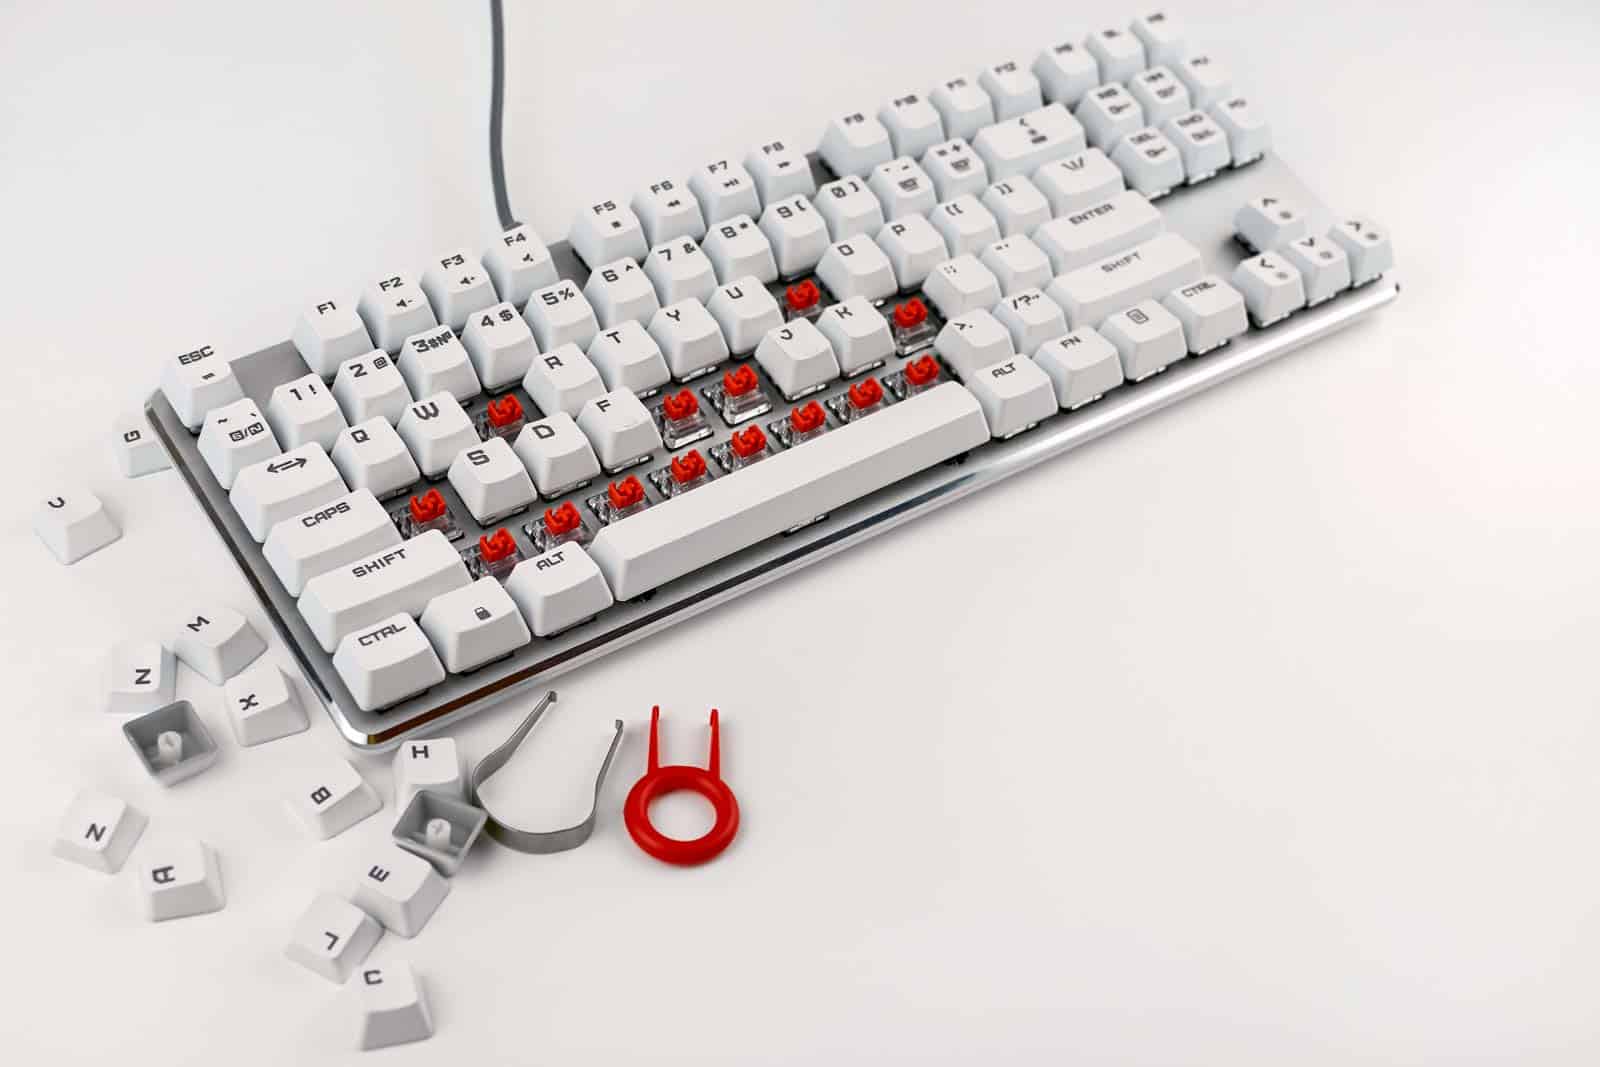 You Can Break Your Mechanical Keyboard By Dropping It